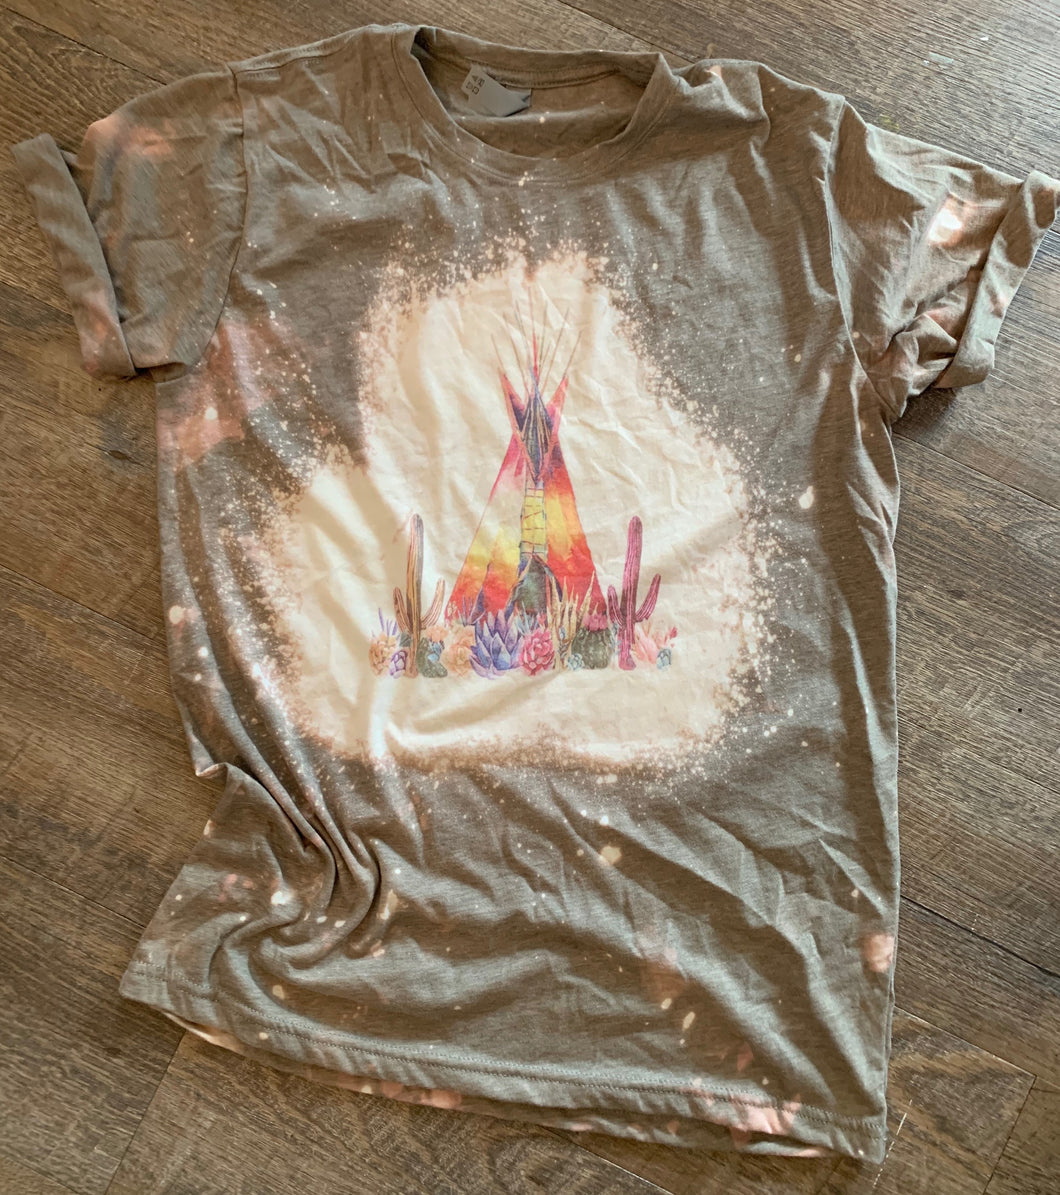 Teepee Cactus. Bleached Graphic Tee - Mavictoria Designs Hot Press Express